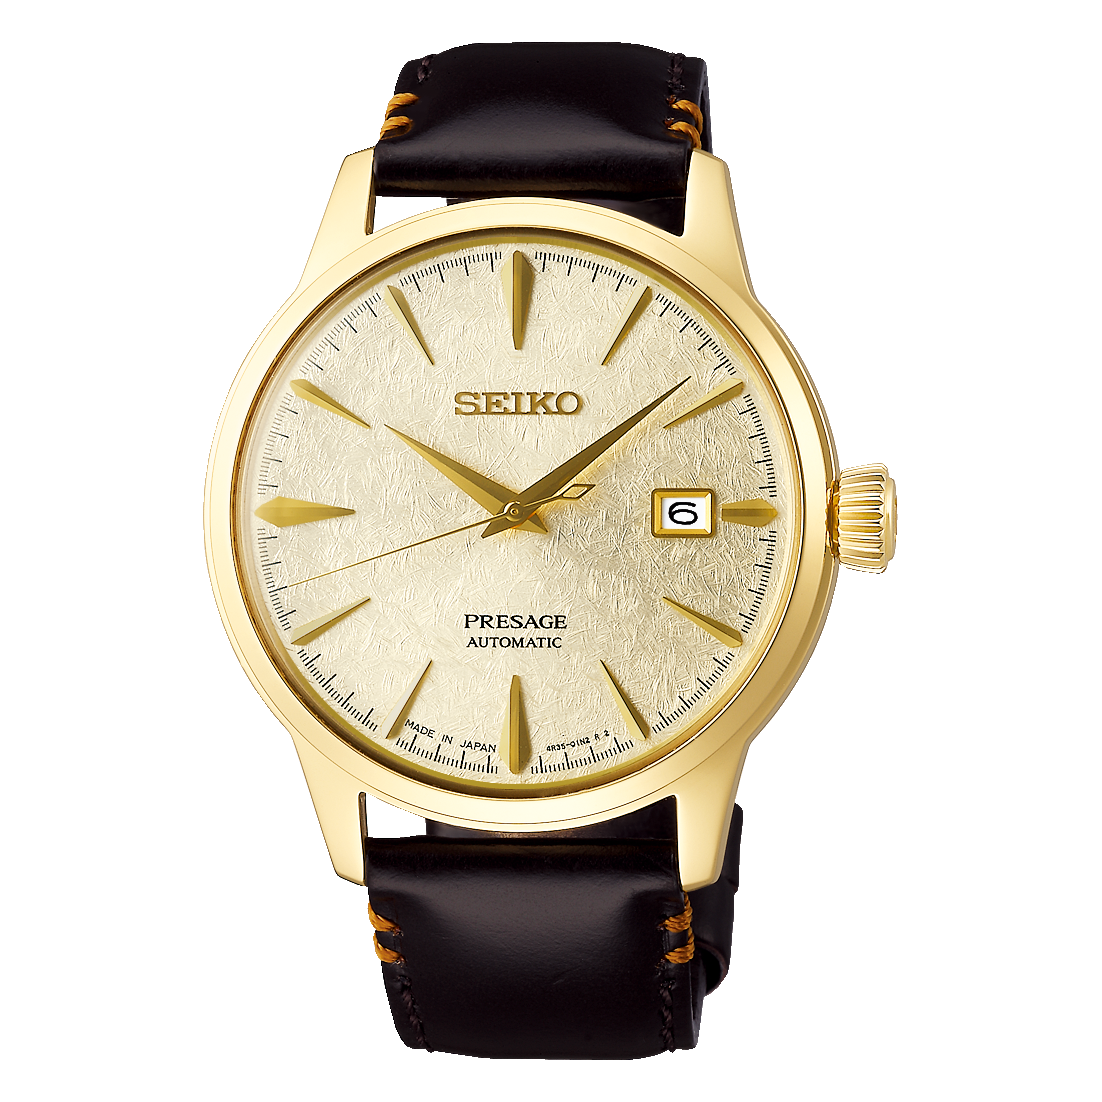 Seiko Presage Cocktail Time SRPH78 Star Bar Limited Edition Automatic